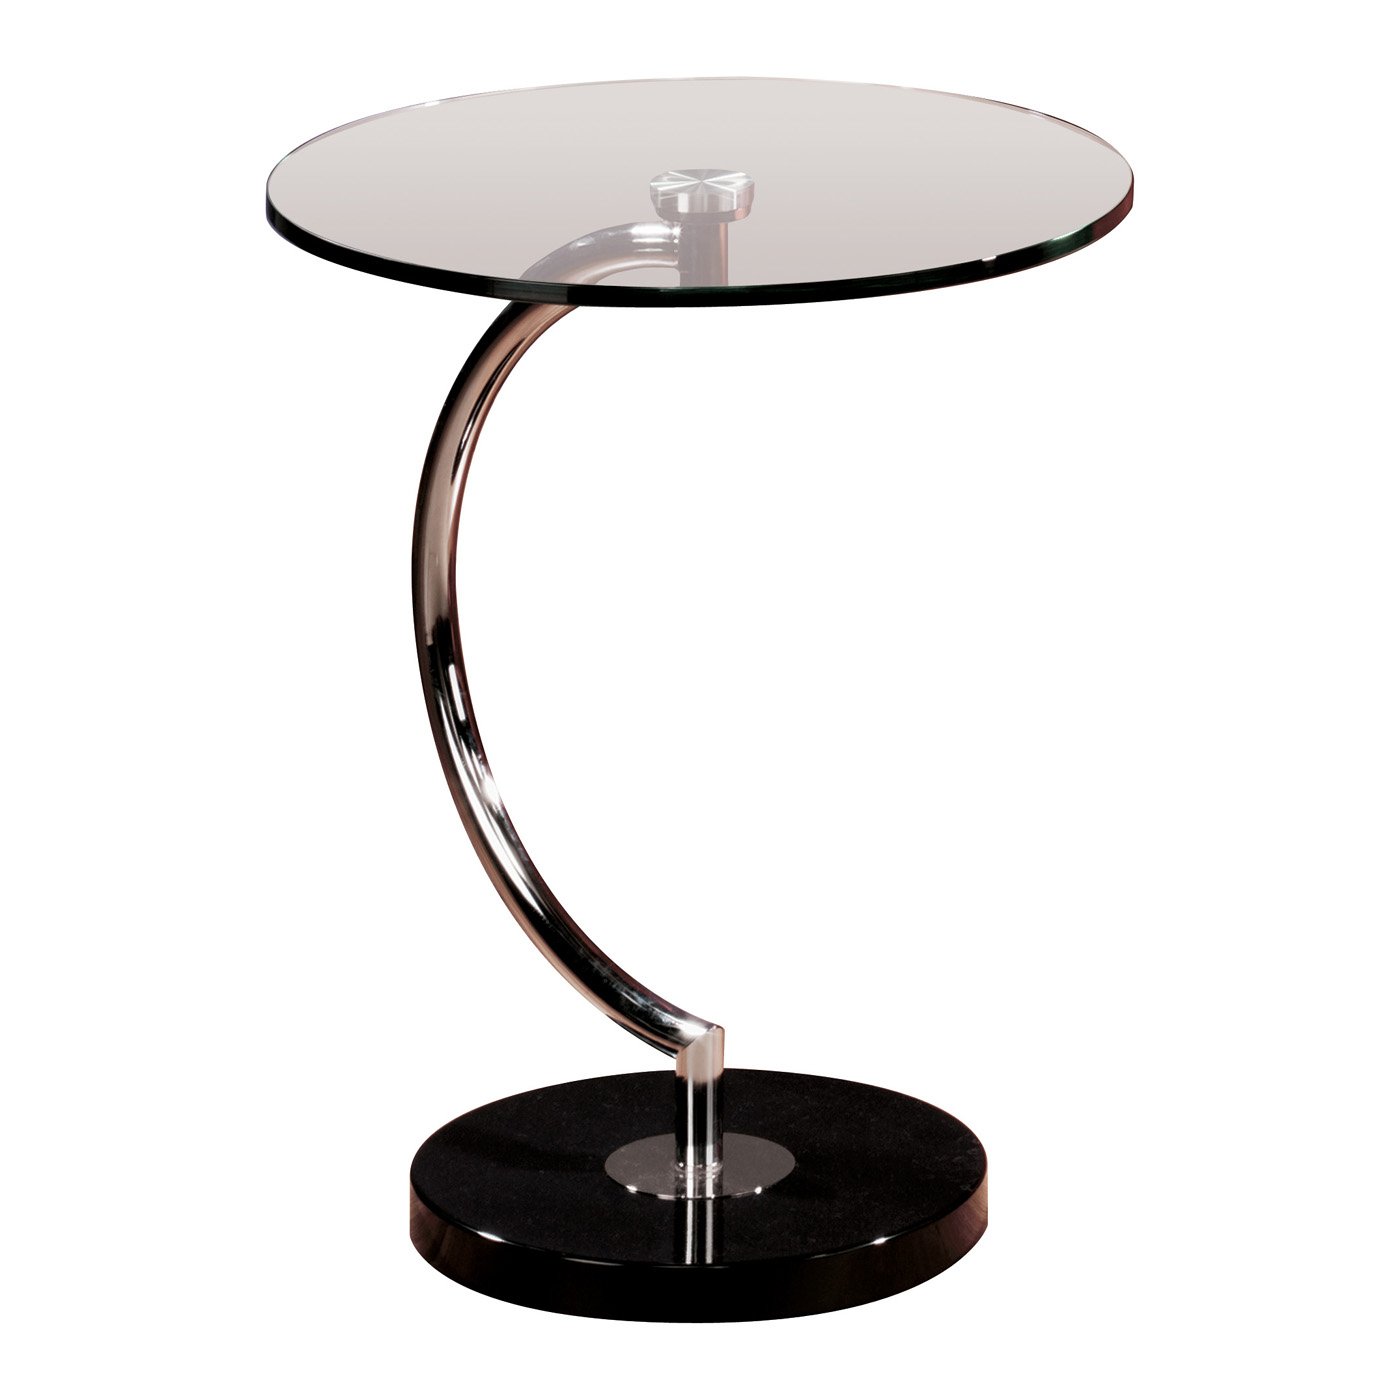 side table design the super unbelievable black round end stylish shaped for your home printableboutique unique modern contemporary glass top occasional tables vintage wooden chest